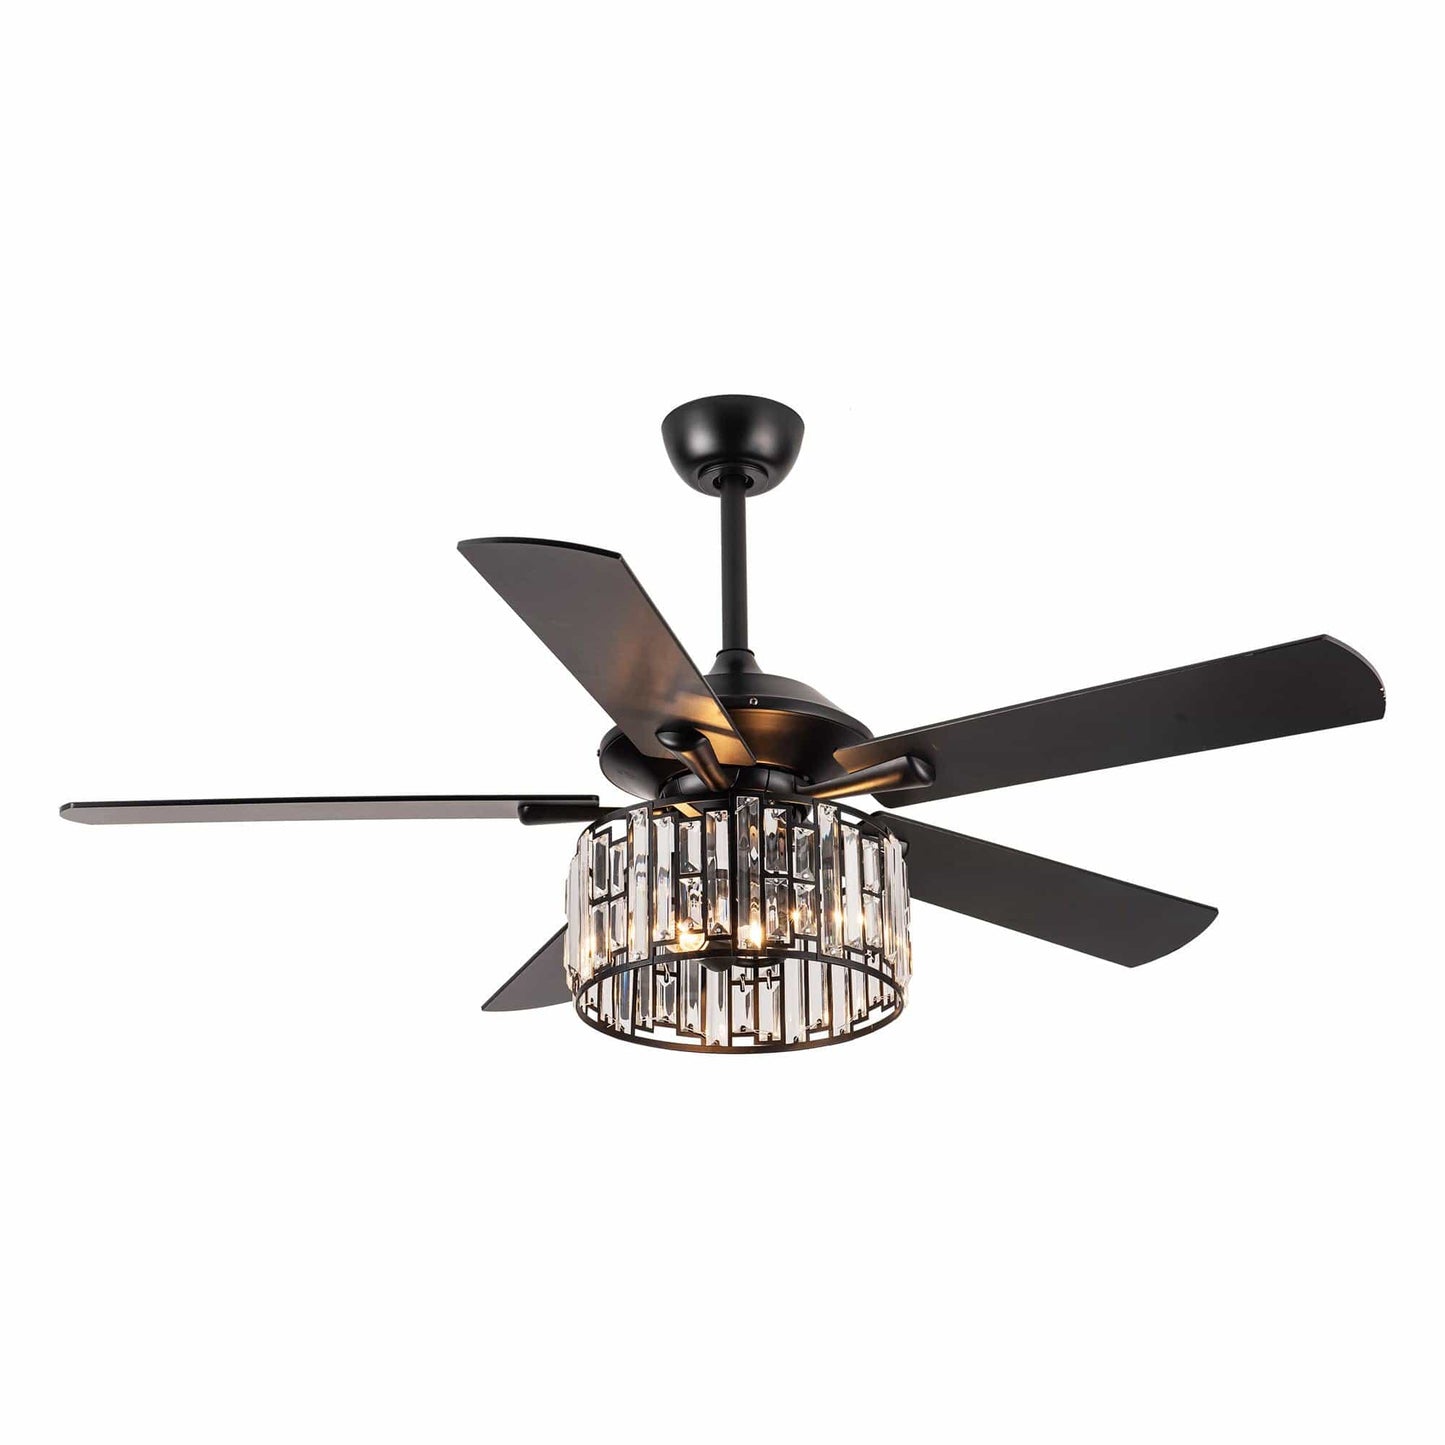 Parrot Uncle 52" Dicken Modern Downrod Mount Reversible Crystal Ceiling Fan with Lighting and Remote Control